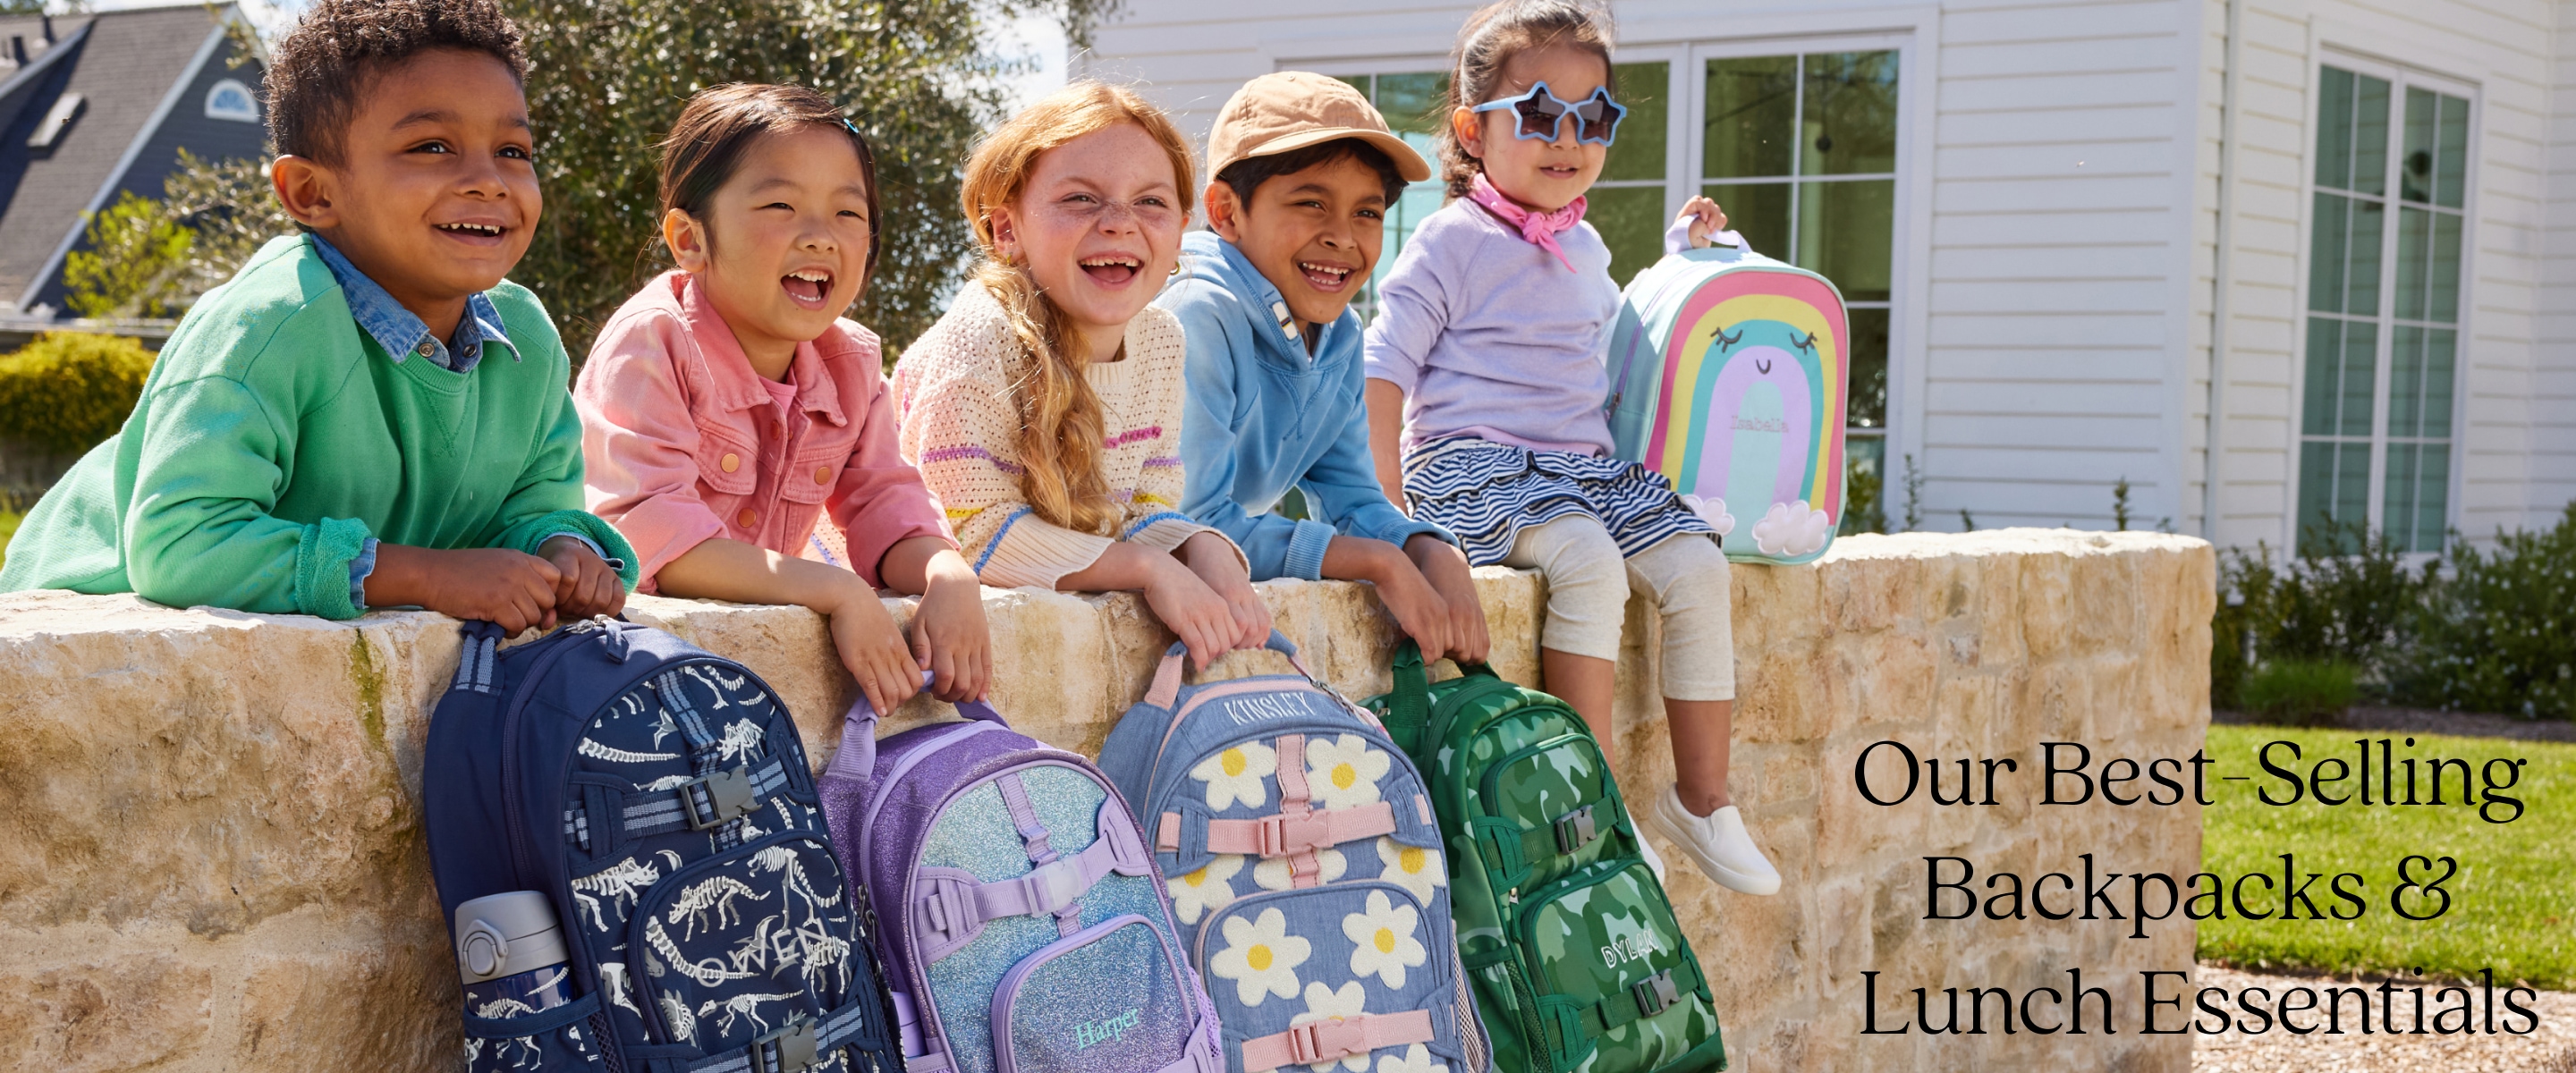 Our Best-Selling Backpacks & Lunch Essentials